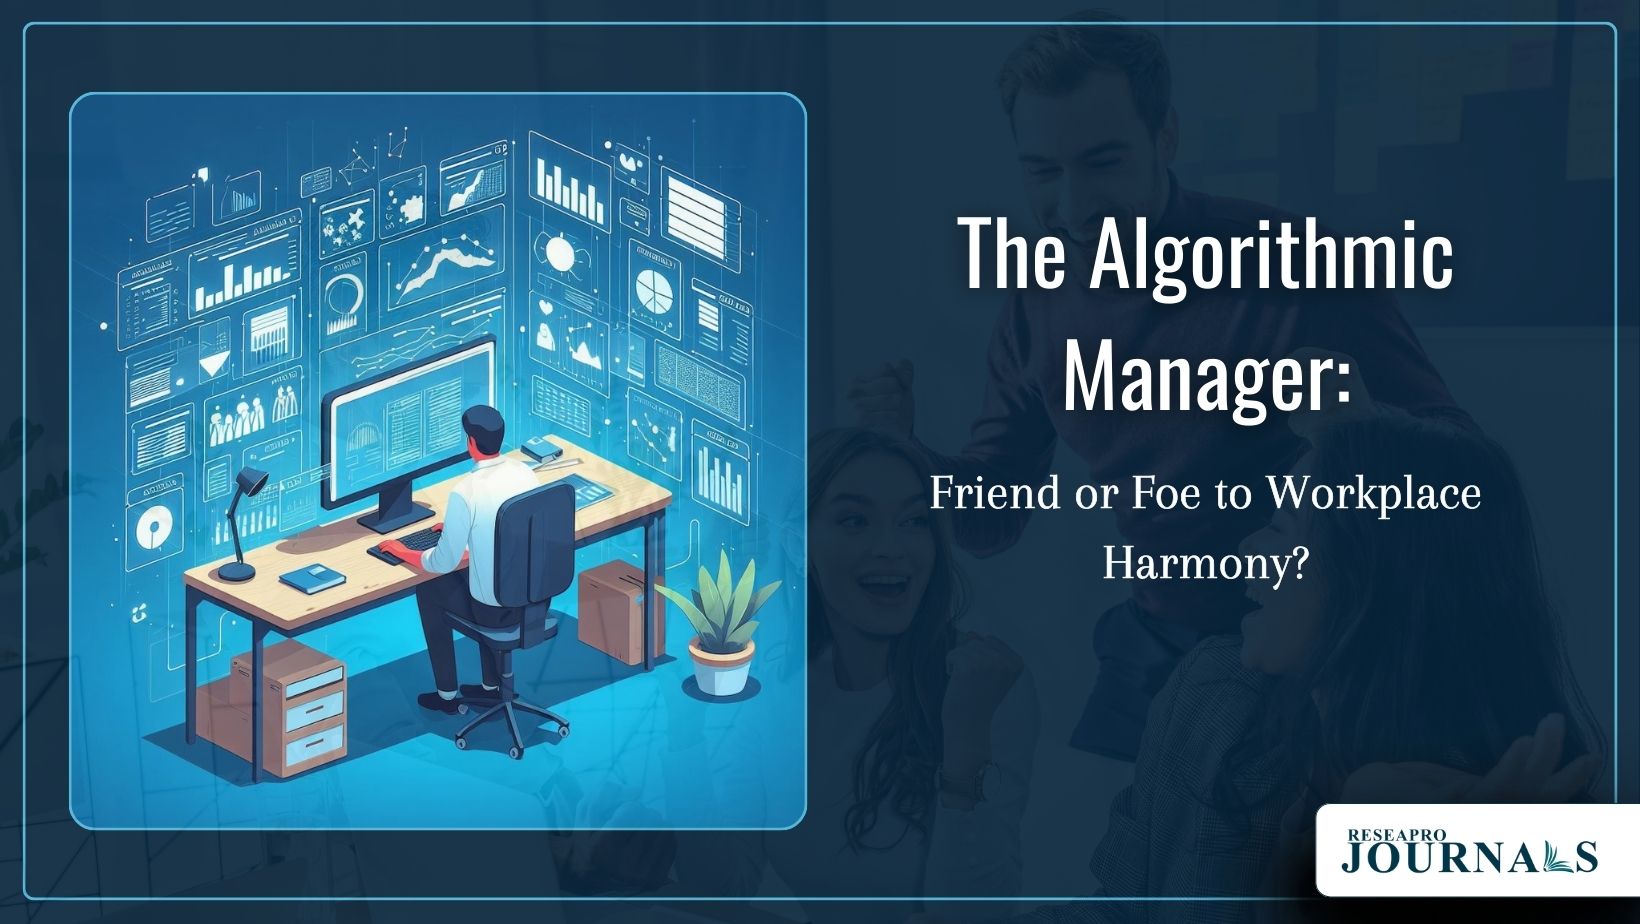 Is the rise of algorithmic management putting workplace camaraderie at risk?